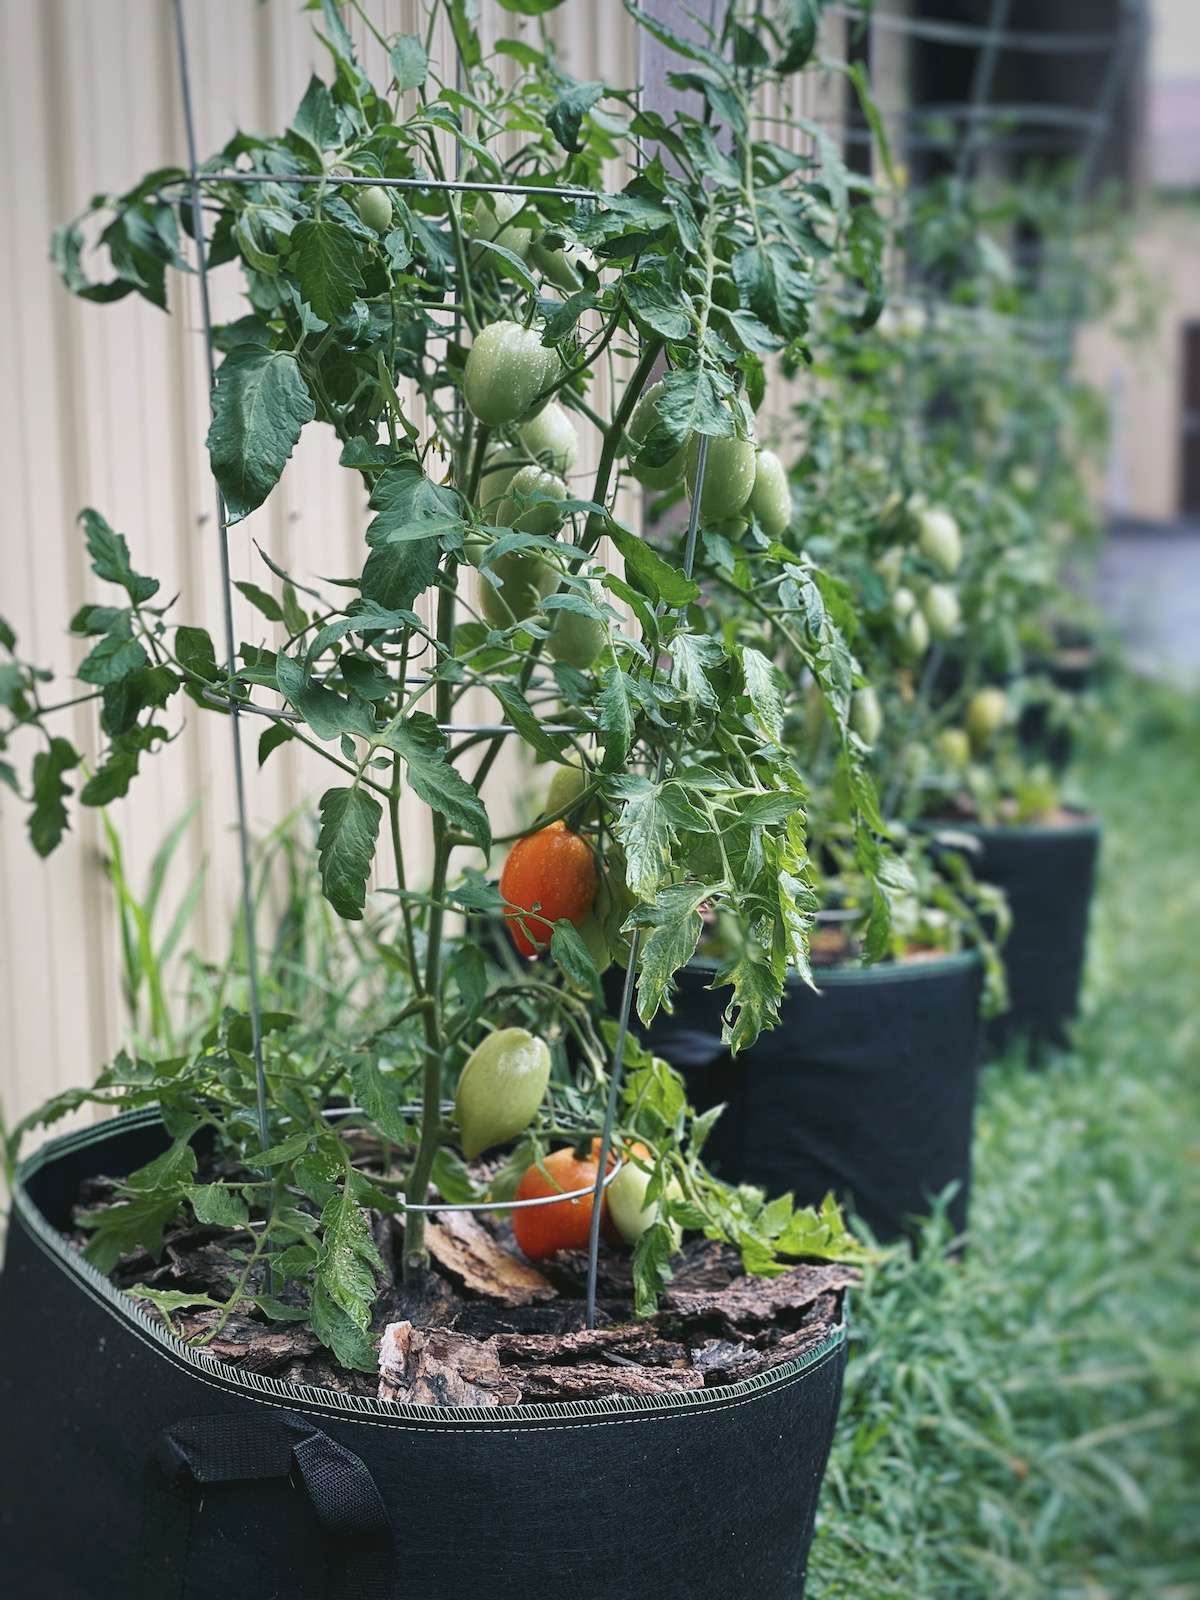 https://thehomesteadingrd.com/wp-content/uploads/2022/05/Growing-Tomatoes-in-Grow-Bags-2.jpg